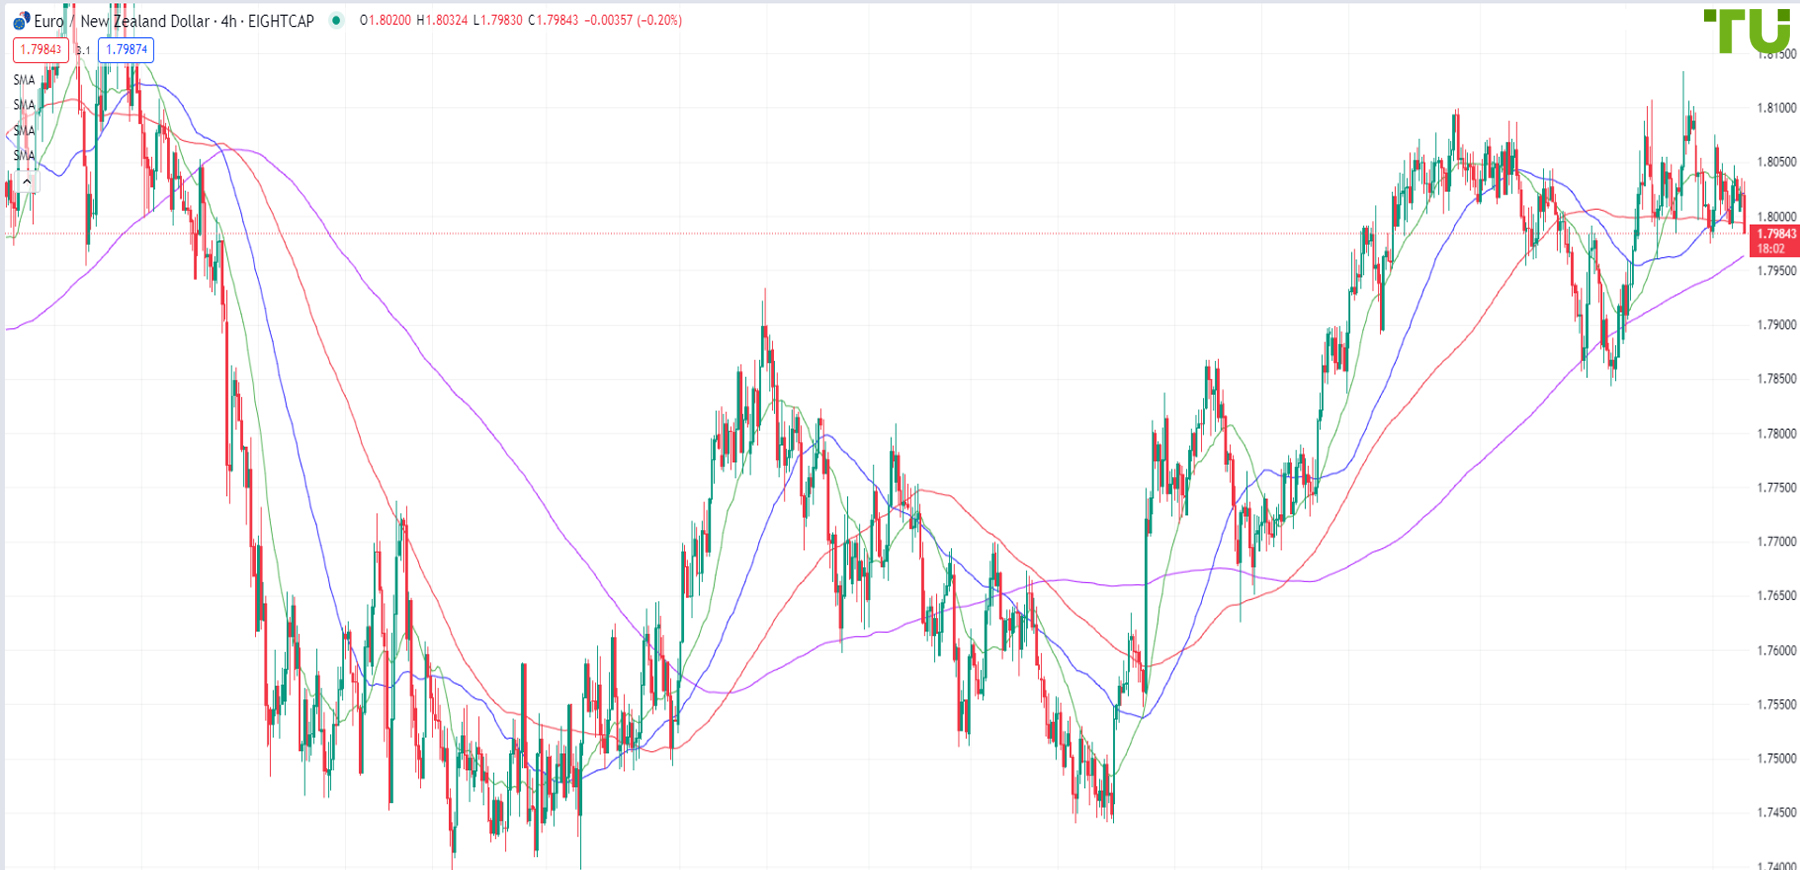 EUR/NZD may break current support